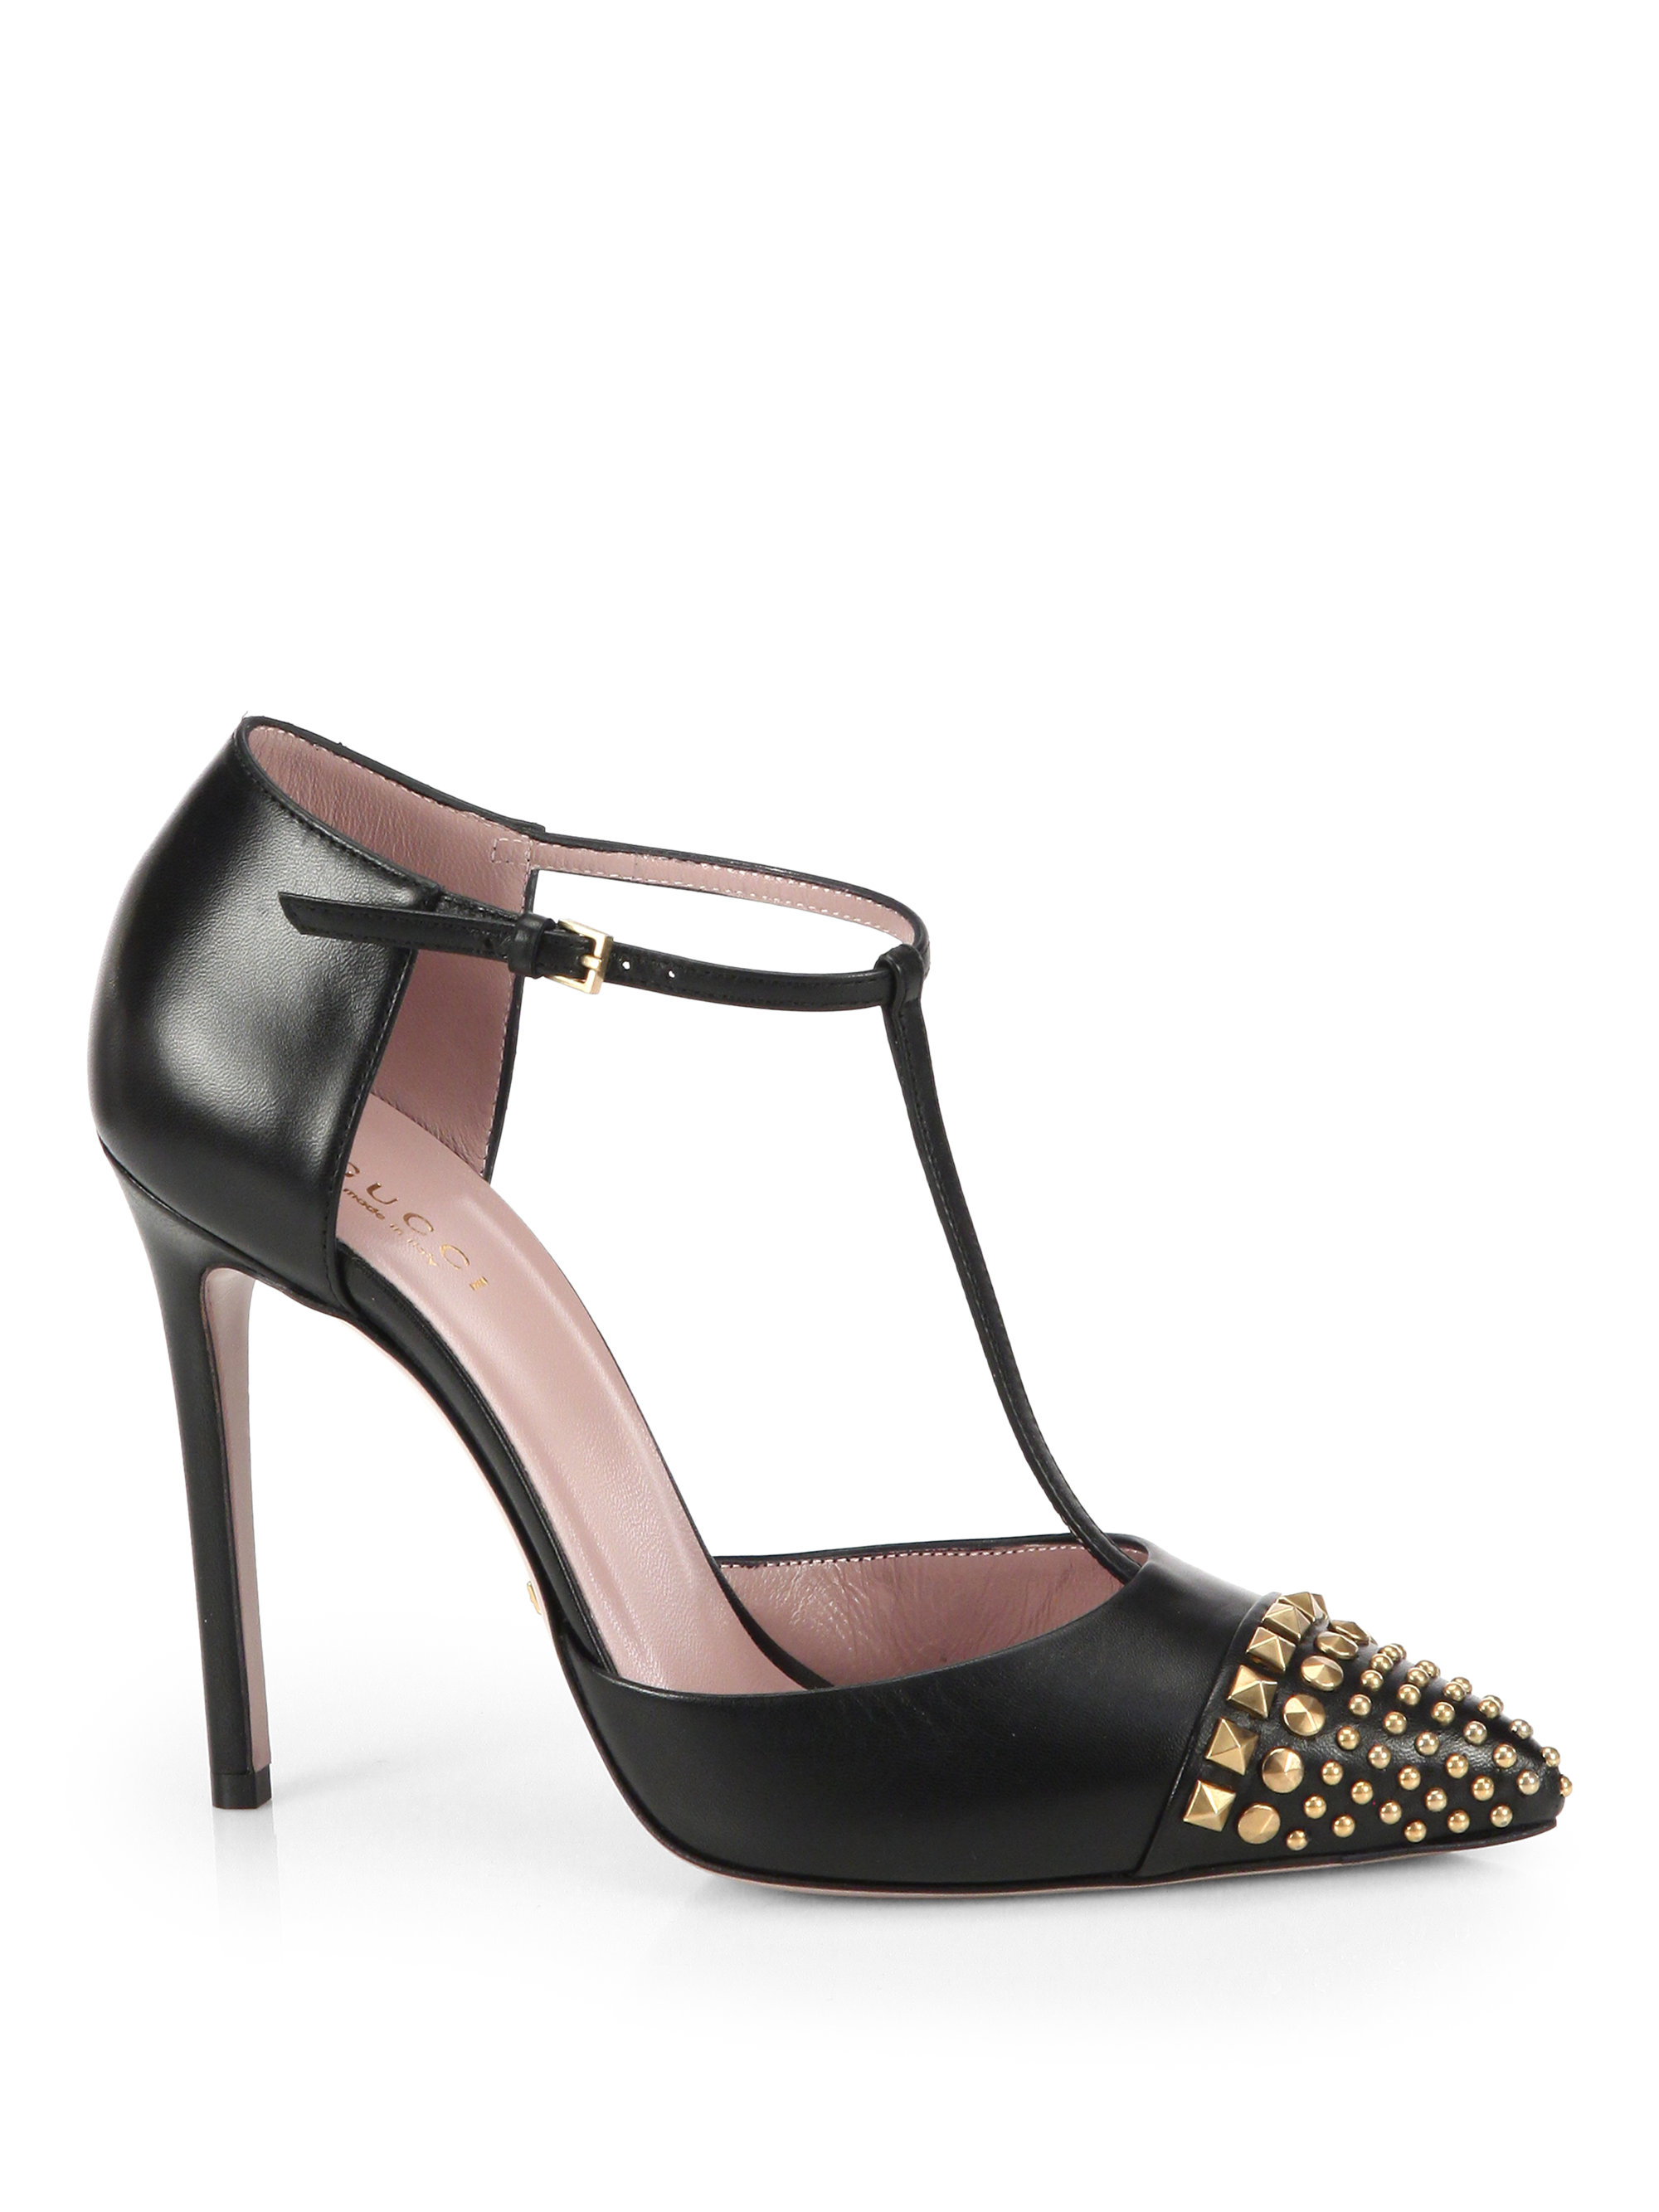 Gucci Studded Leather T-Strap Pumps in Black | Lyst